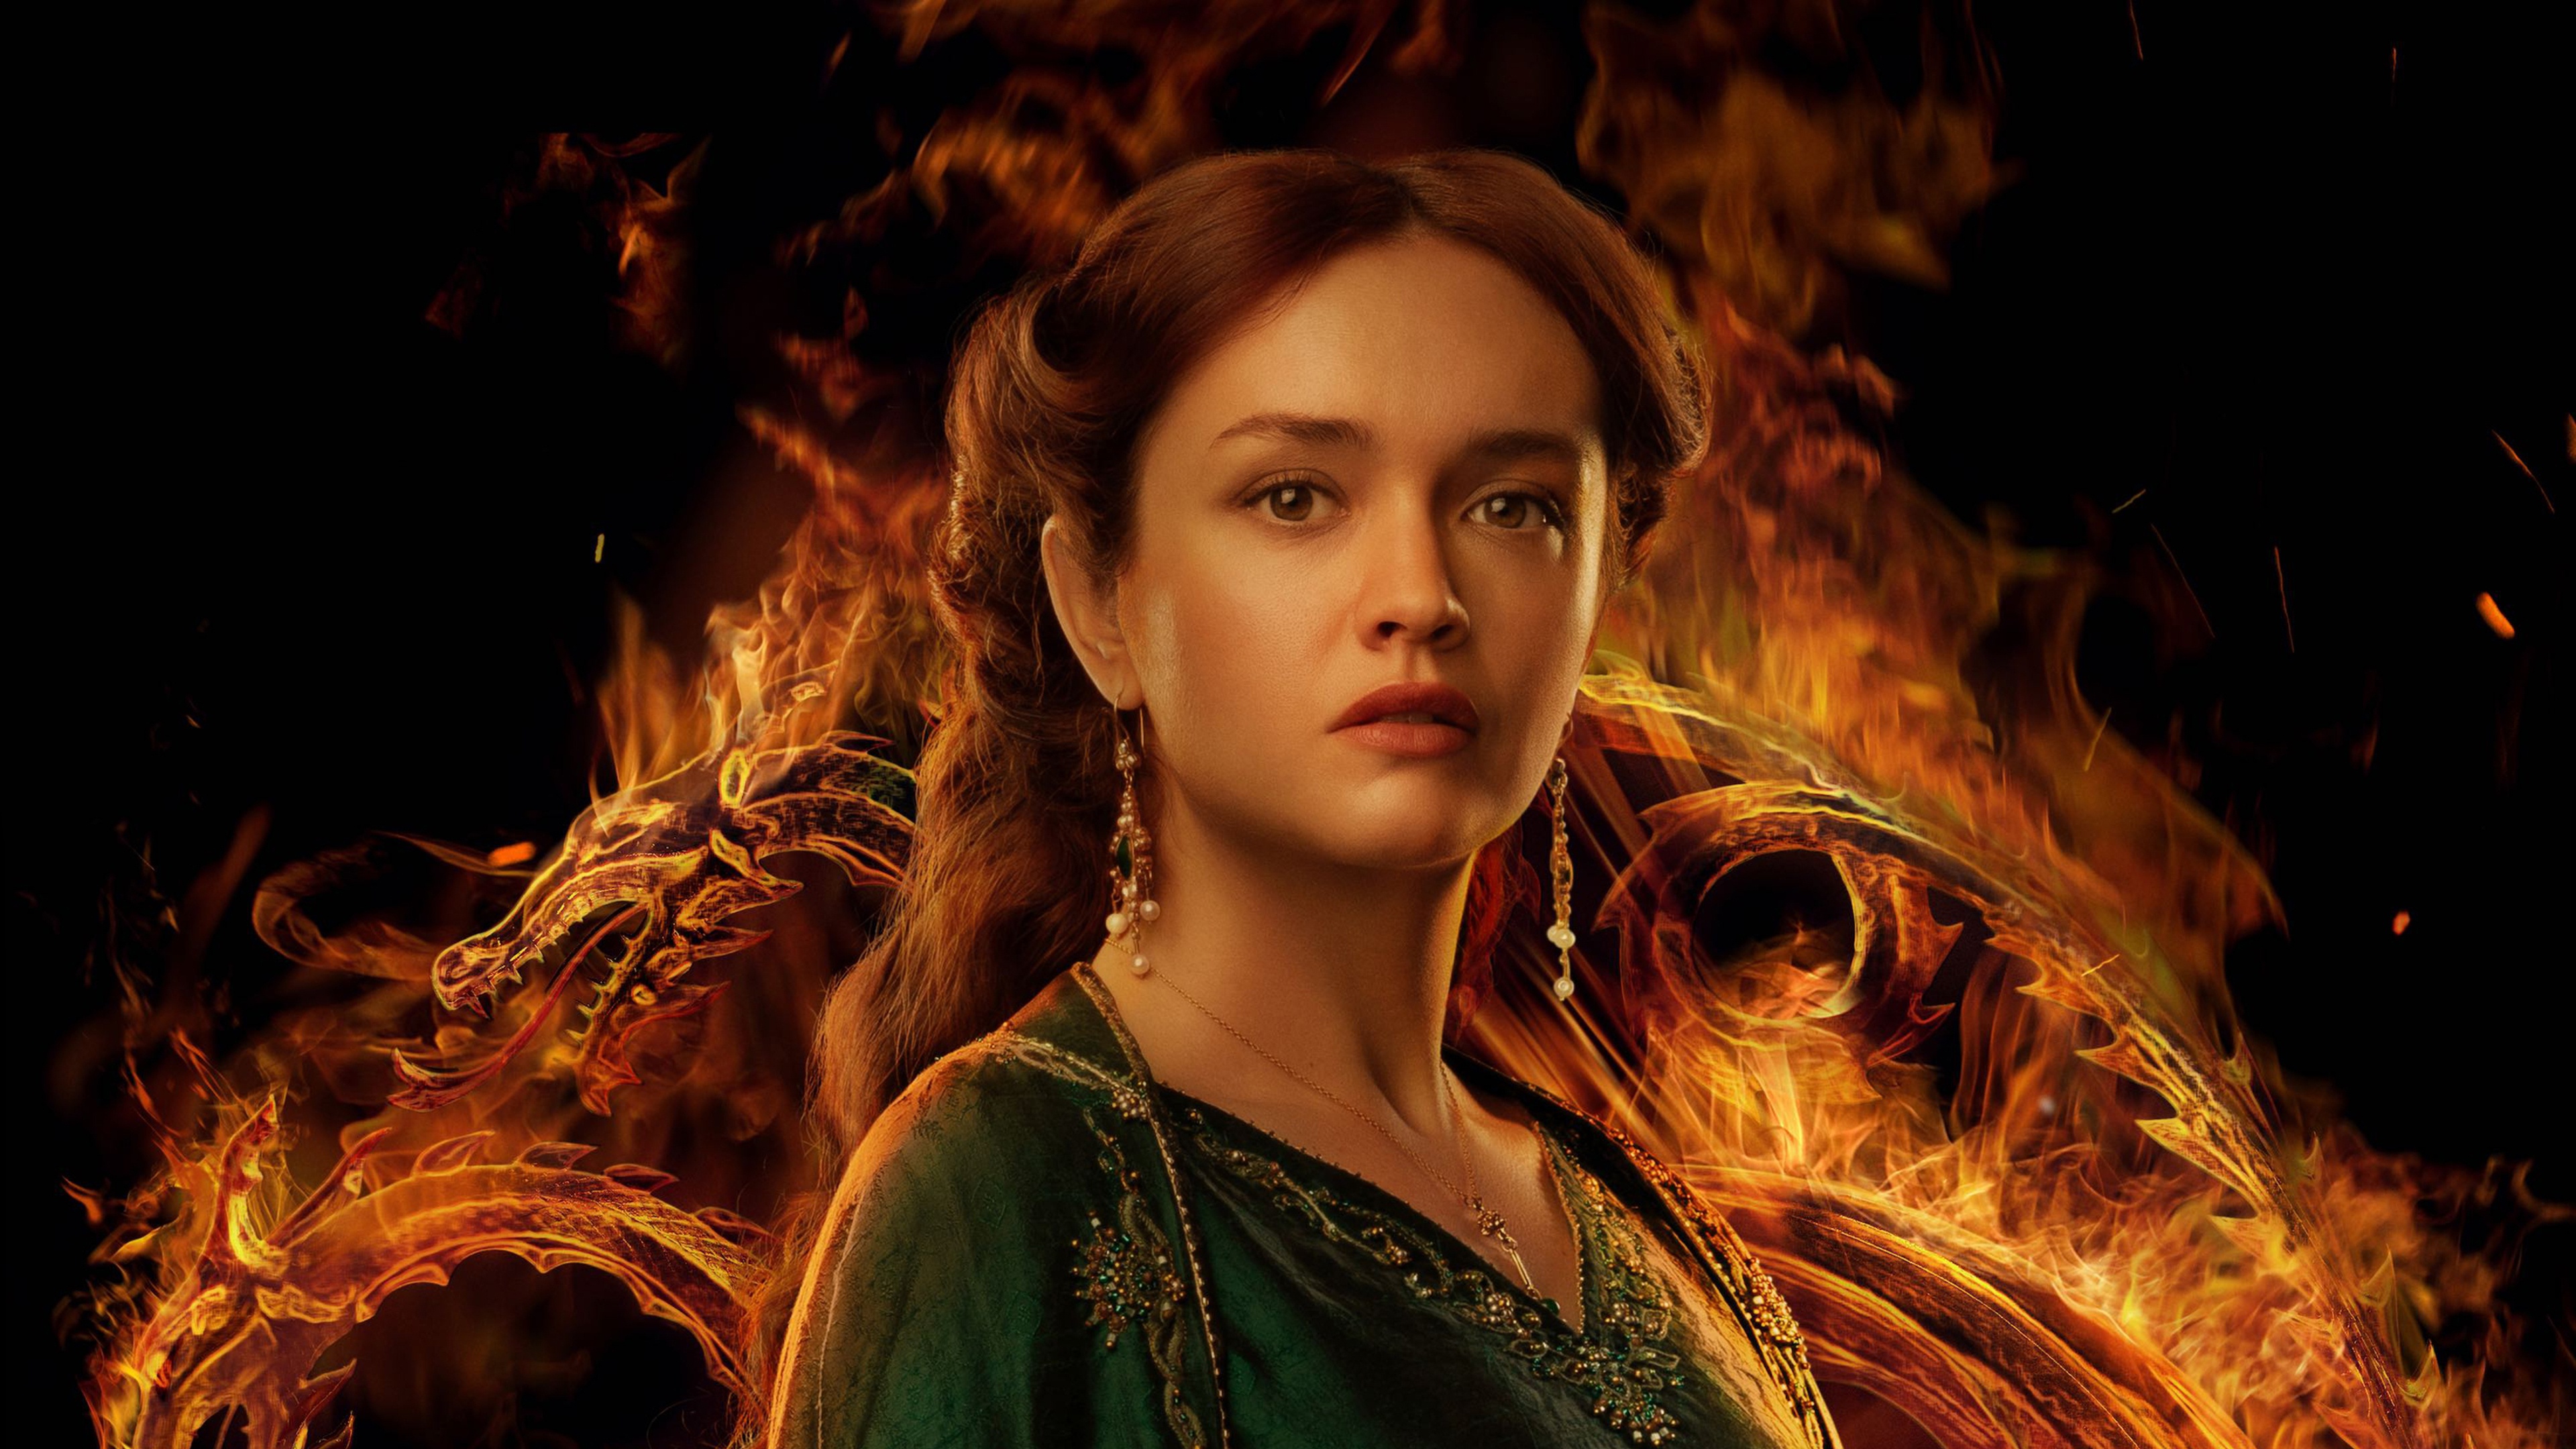 House of the Dragon Wallpaper 4K, Olivia Cooke, Alicent Hightower, 2022 Series, Movies